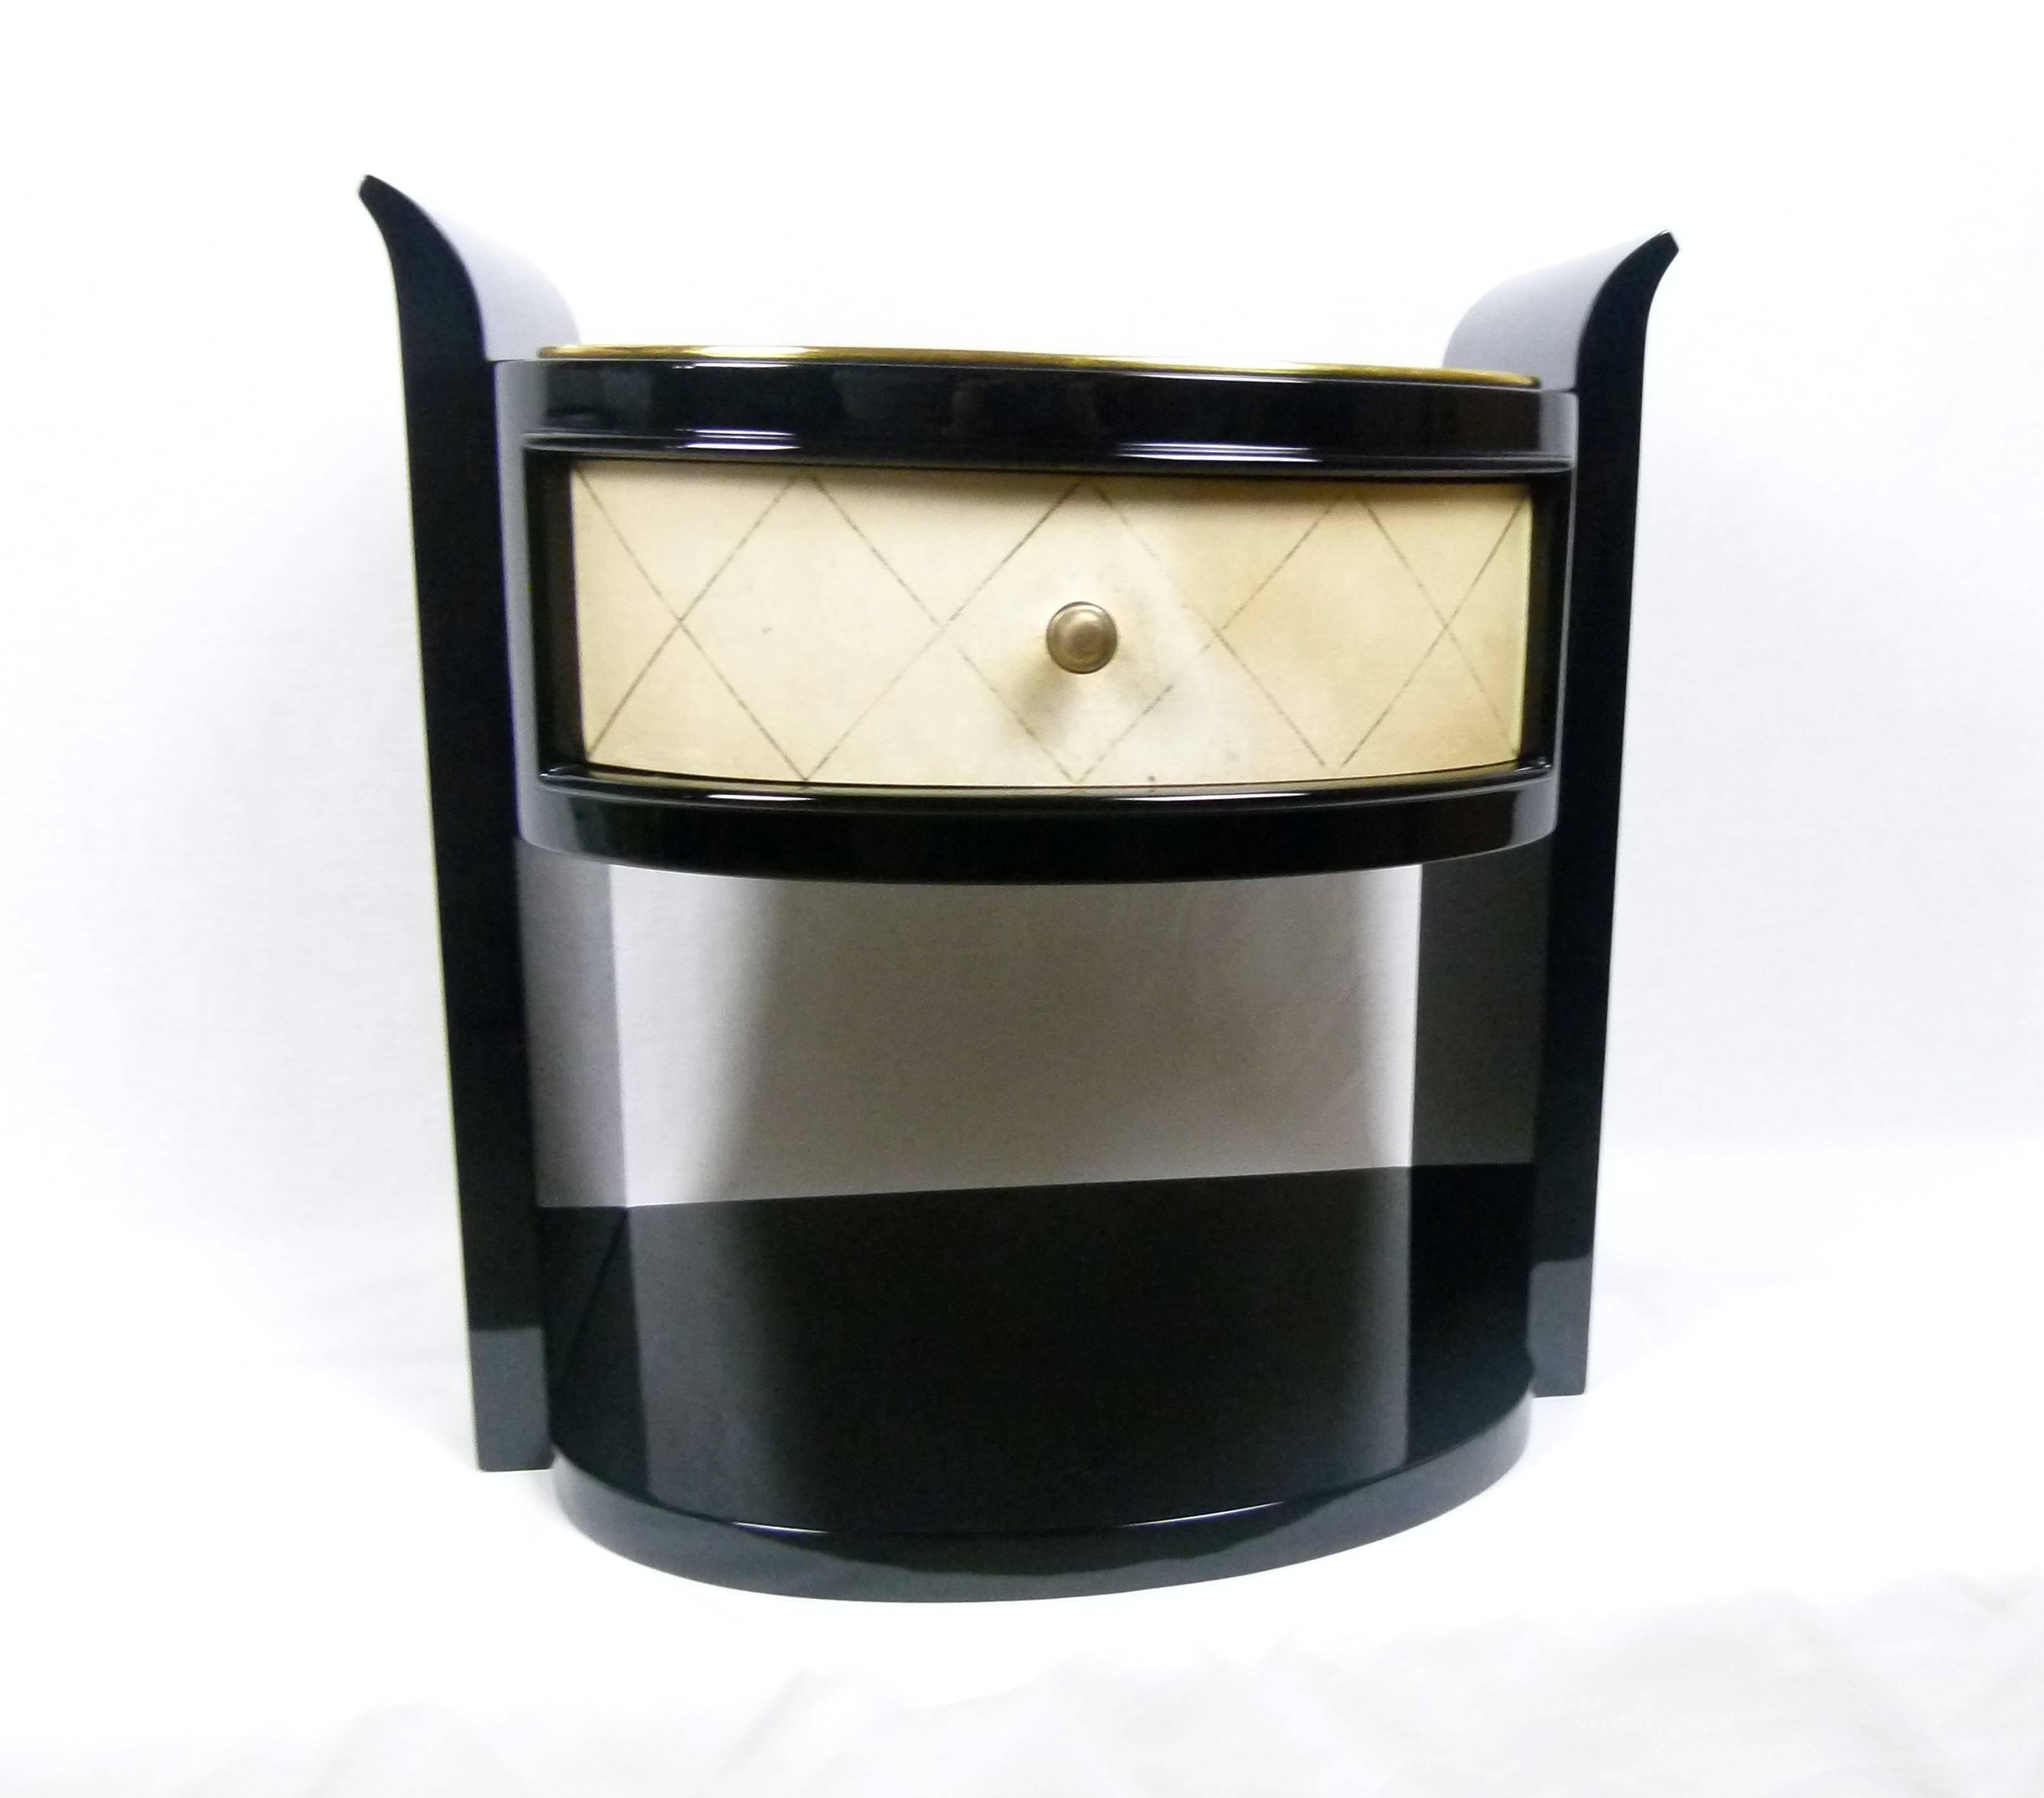 Pair of wall bedside tables in black lacquered wood and parchment.
These bedside tables consist of two black lacquered wood sides connected together by a black lacquer box with a parchment wrapped front drawer.
A black lacquer shelf connects the